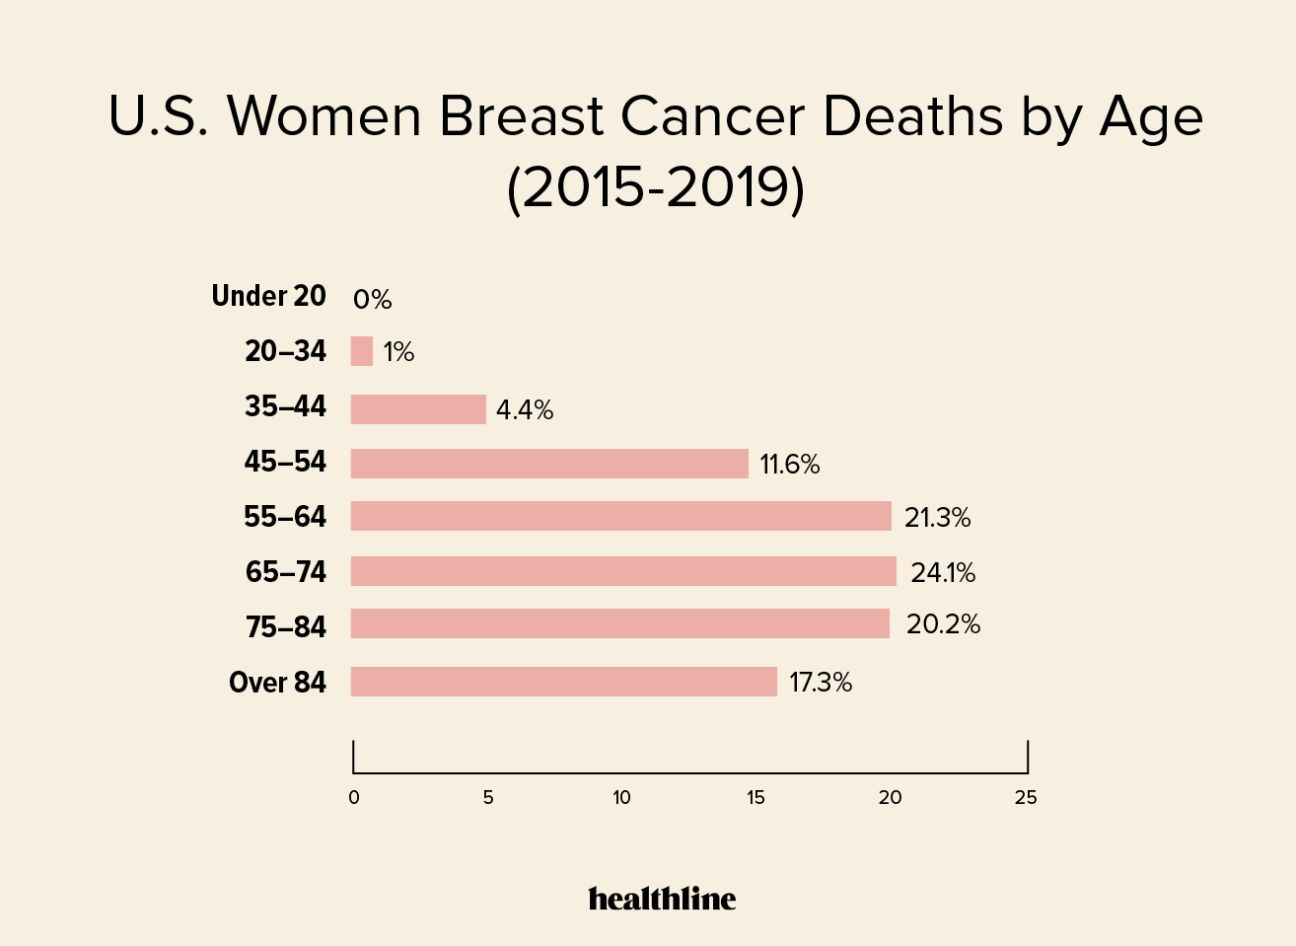 Triple-negative breast cancer reflects health inequities in the U.S. - STAT